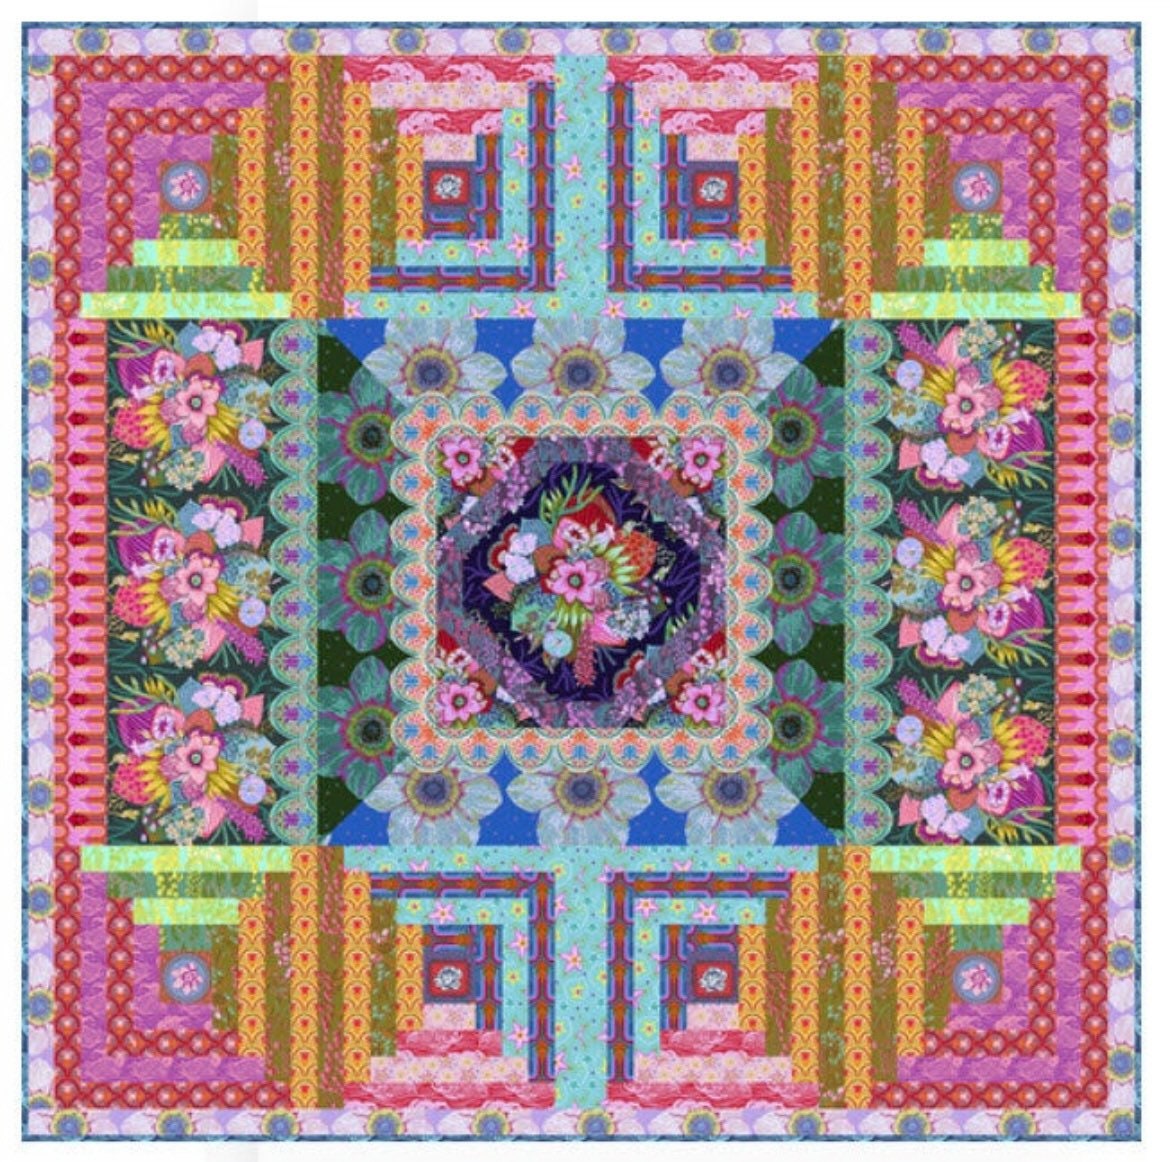 Welcome Home Quilt Kit - Pattern by Anna Maria Horner for Free Spirit Fabrics